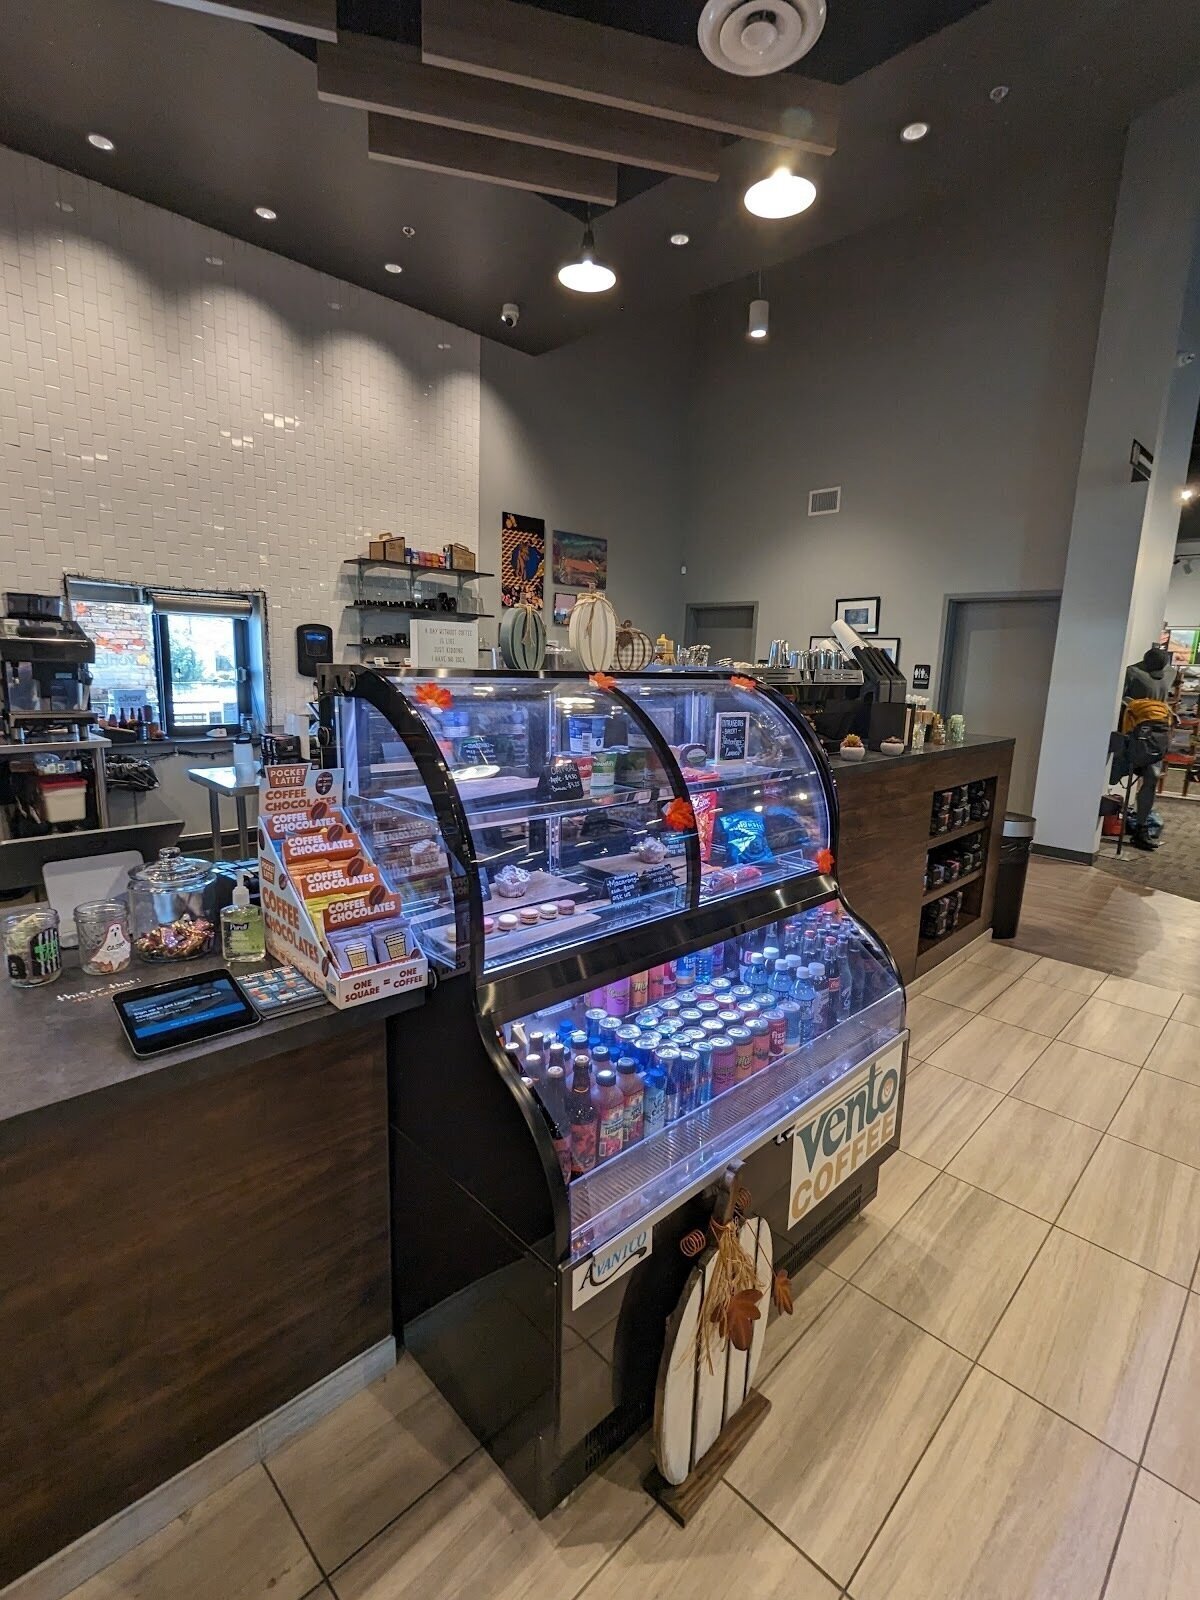 <span class="translation_missing" title="translation missing: en.meta.location_title, location_name: Vento Coffee, city: Broomfield">Location Title</span>